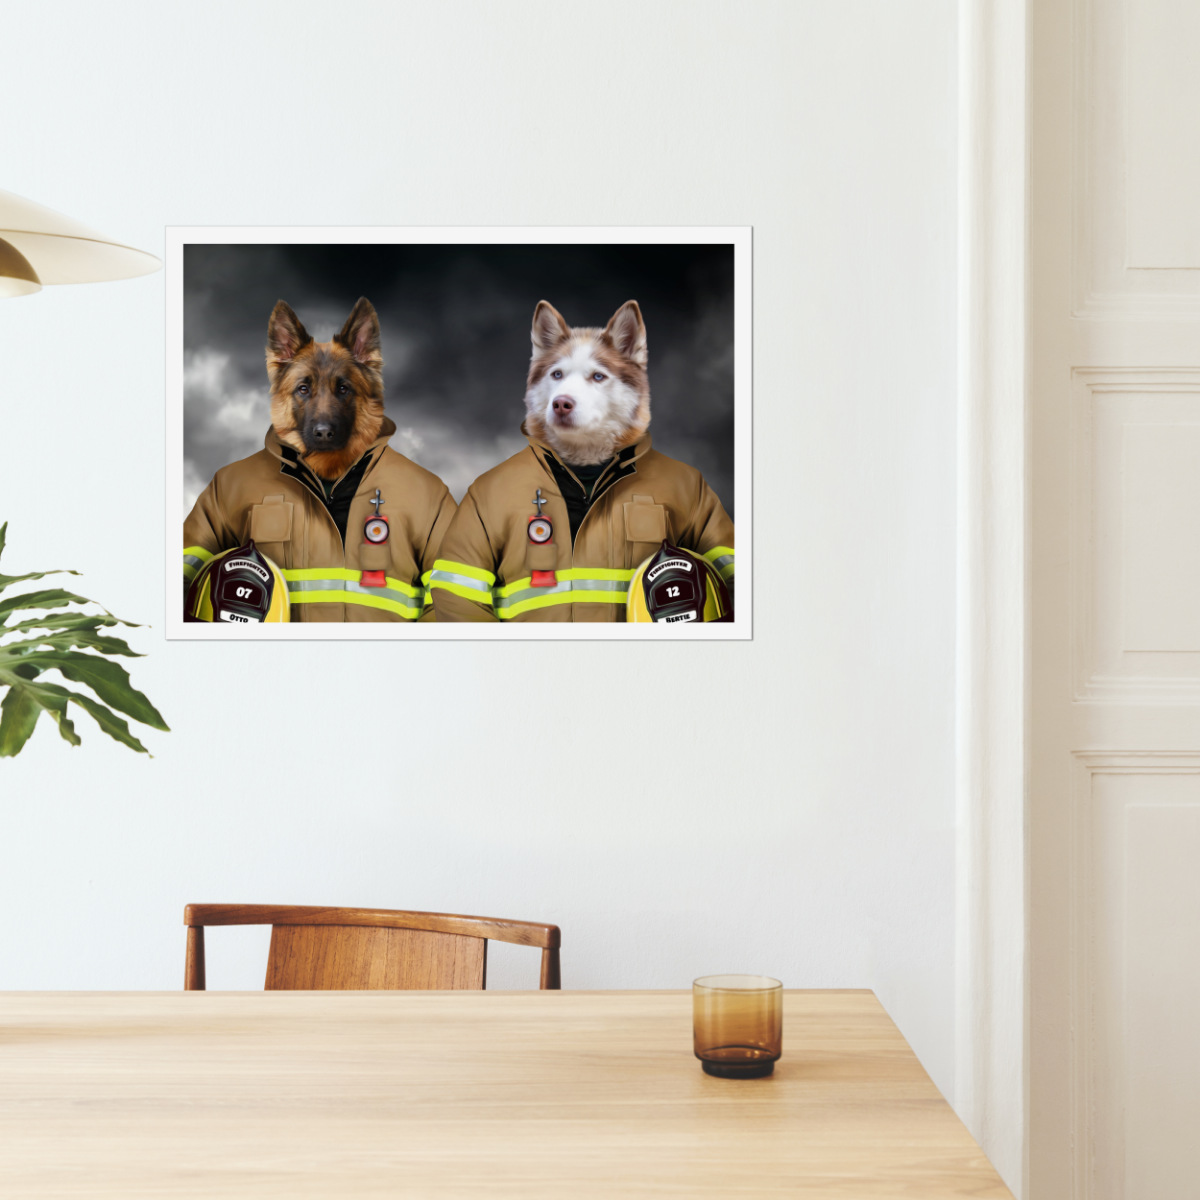 The Firemen: Custom Pet Poster - Paw & Glory - #pet portraits# - #dog portraits# - #pet portraits uk#Paw & Glory, paw and glory, pets canvas crown and paw ad portraits of your dog personalised pet painting medieval pet portrait cat painting from photo pet portrait